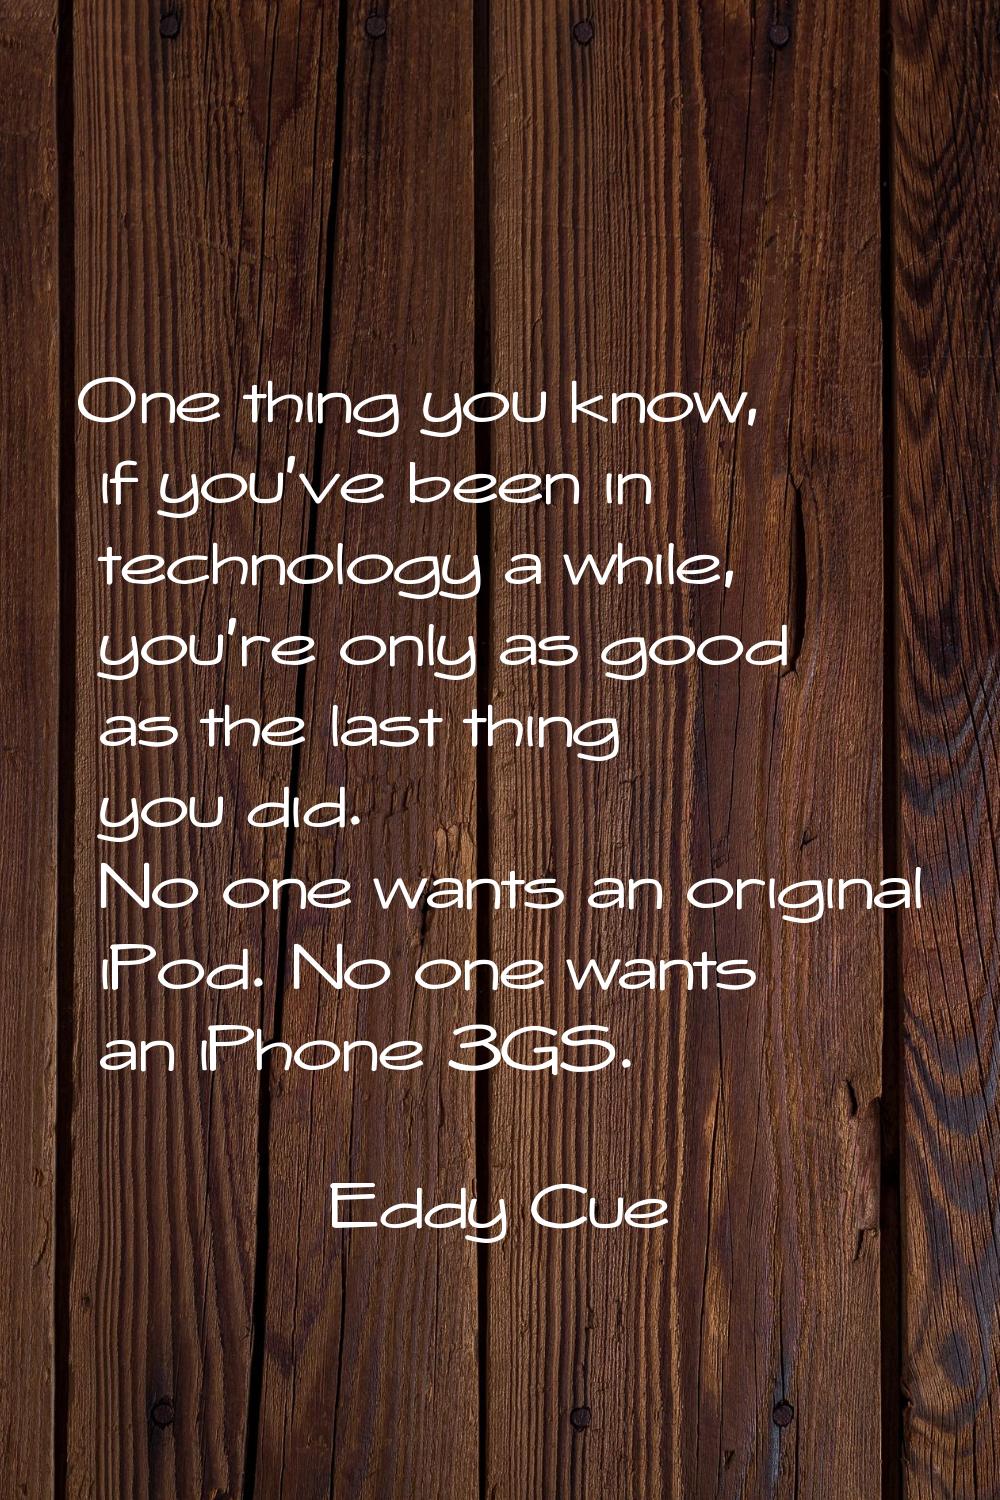 One thing you know, if you've been in technology a while, you're only as good as the last thing you